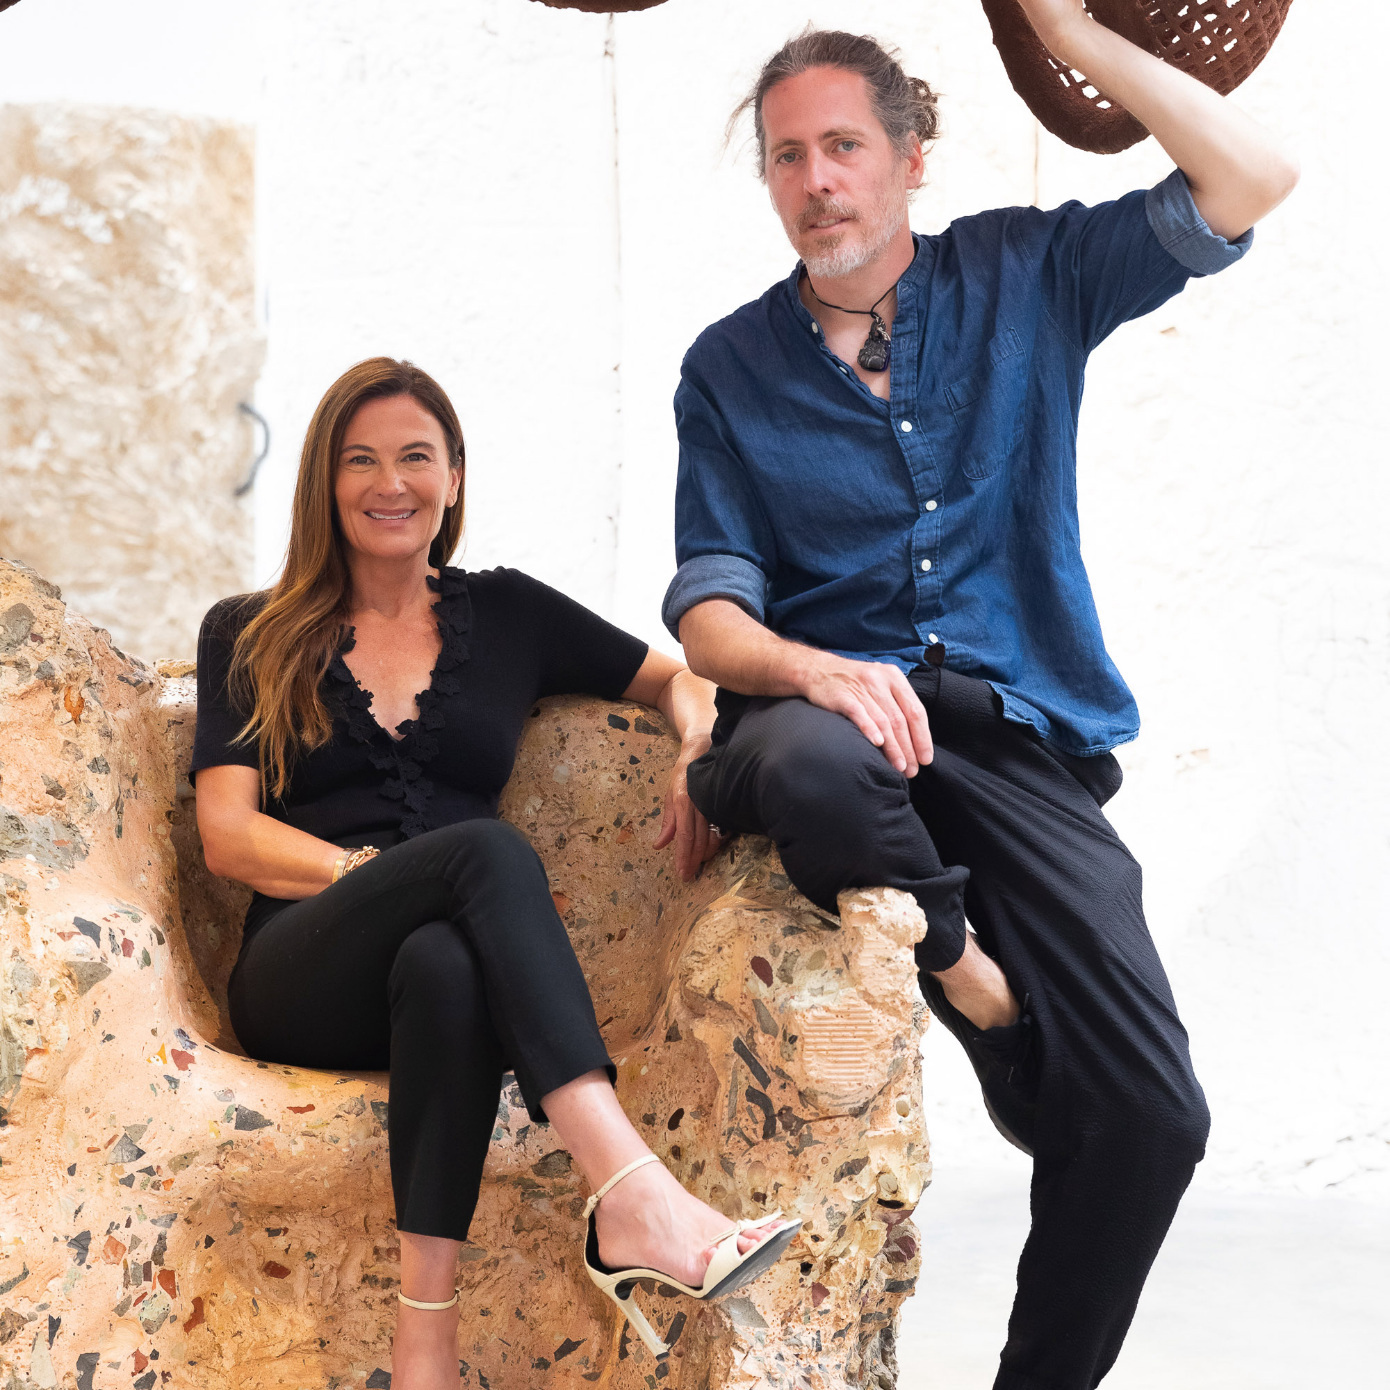 sarah harrelson and artist nacho carbonell with his sculpture